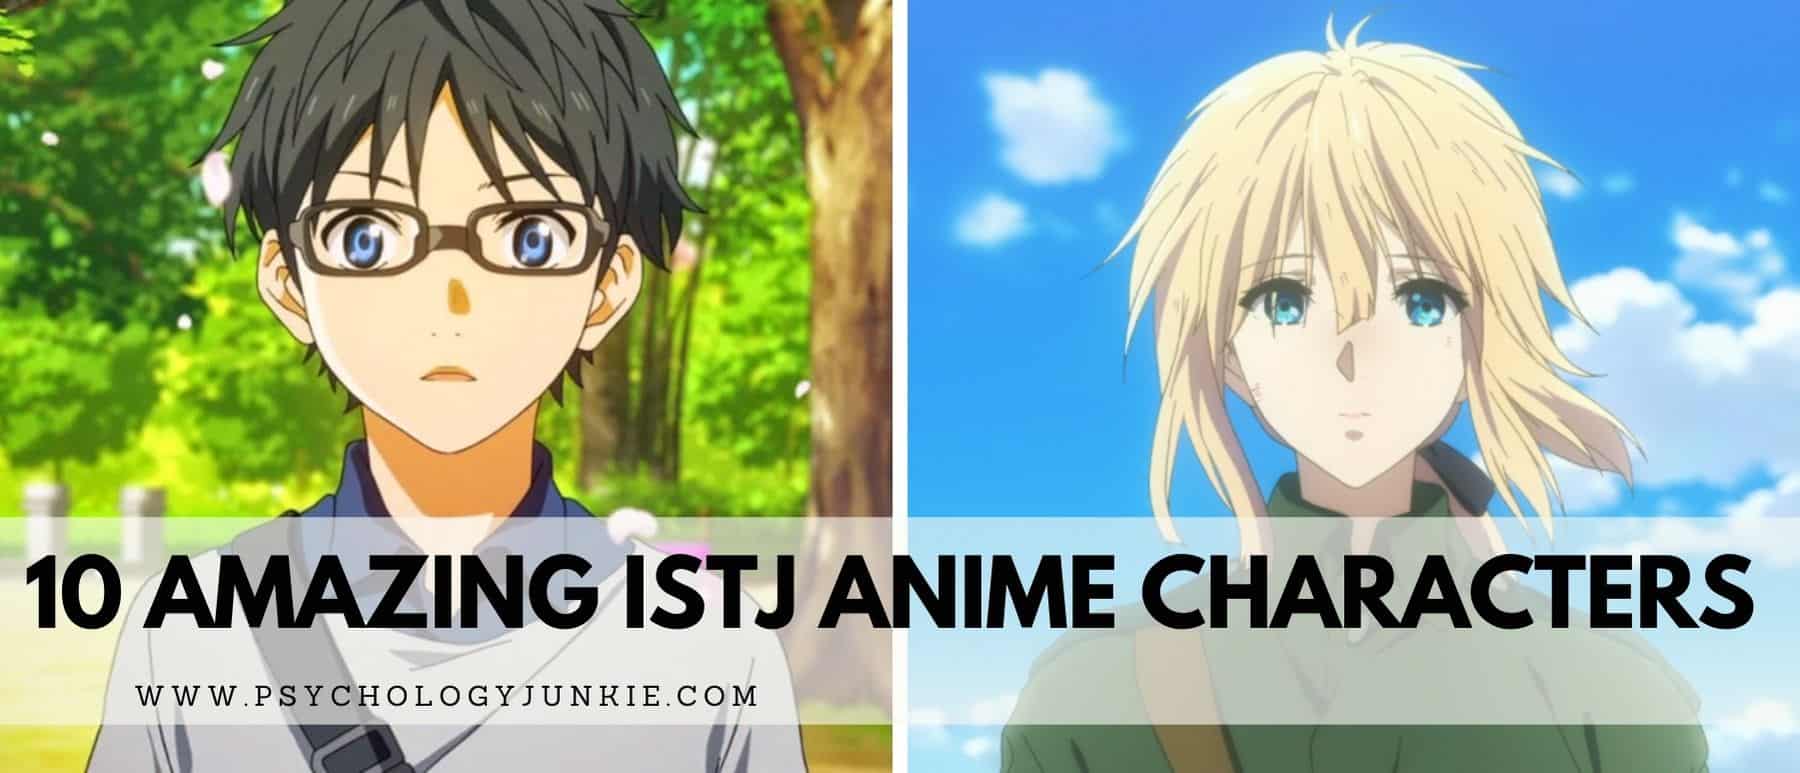 MBTI Anime: 16 Personality Types With Anime Characters - LAST STOP,  stalking killing mbti - thirstymag.com